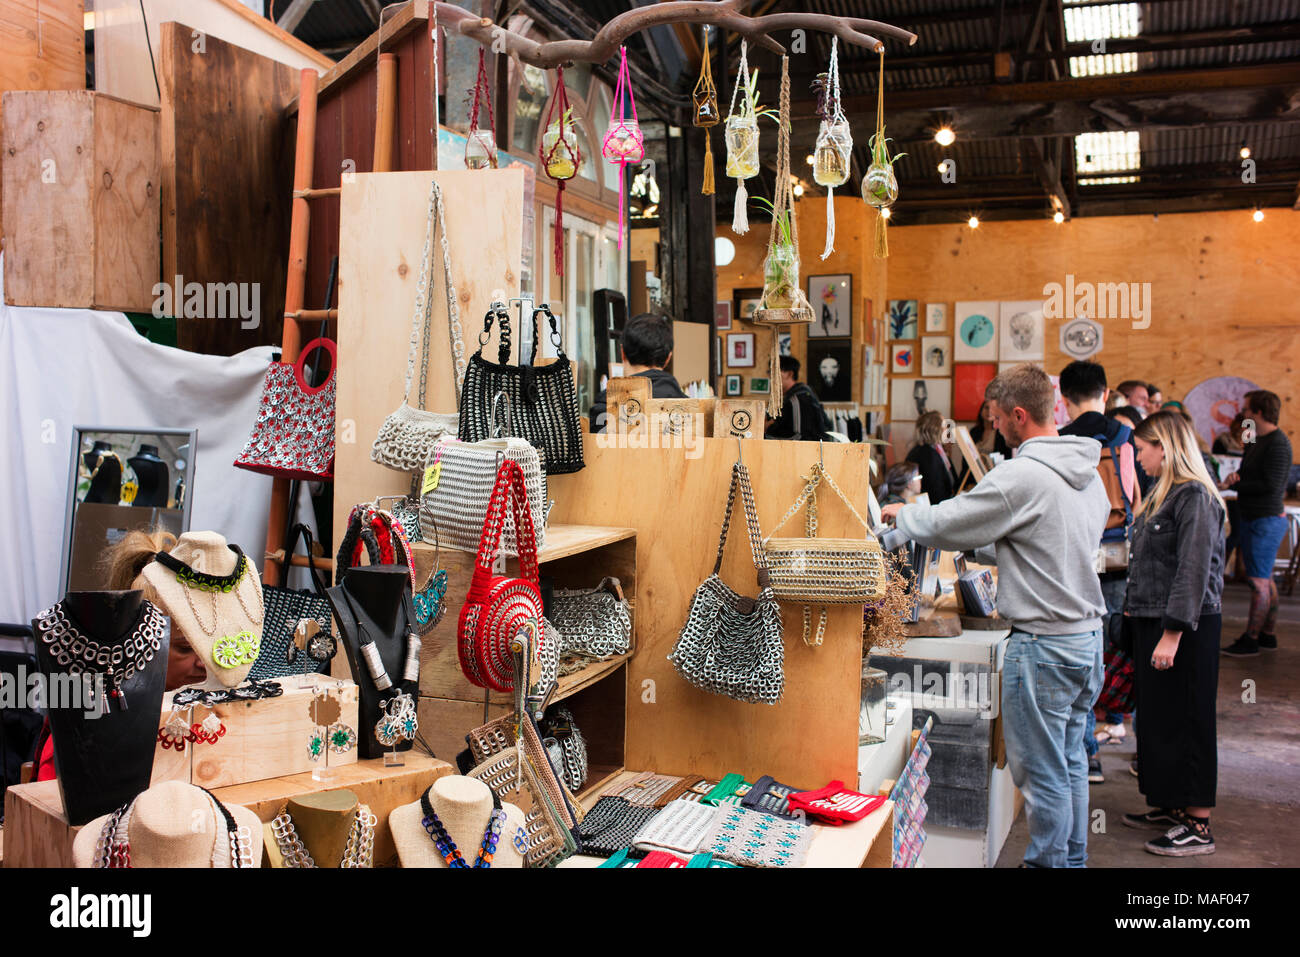 Artists' stalls and shoppers at The Rose Street Artists' Market. Stock Photo